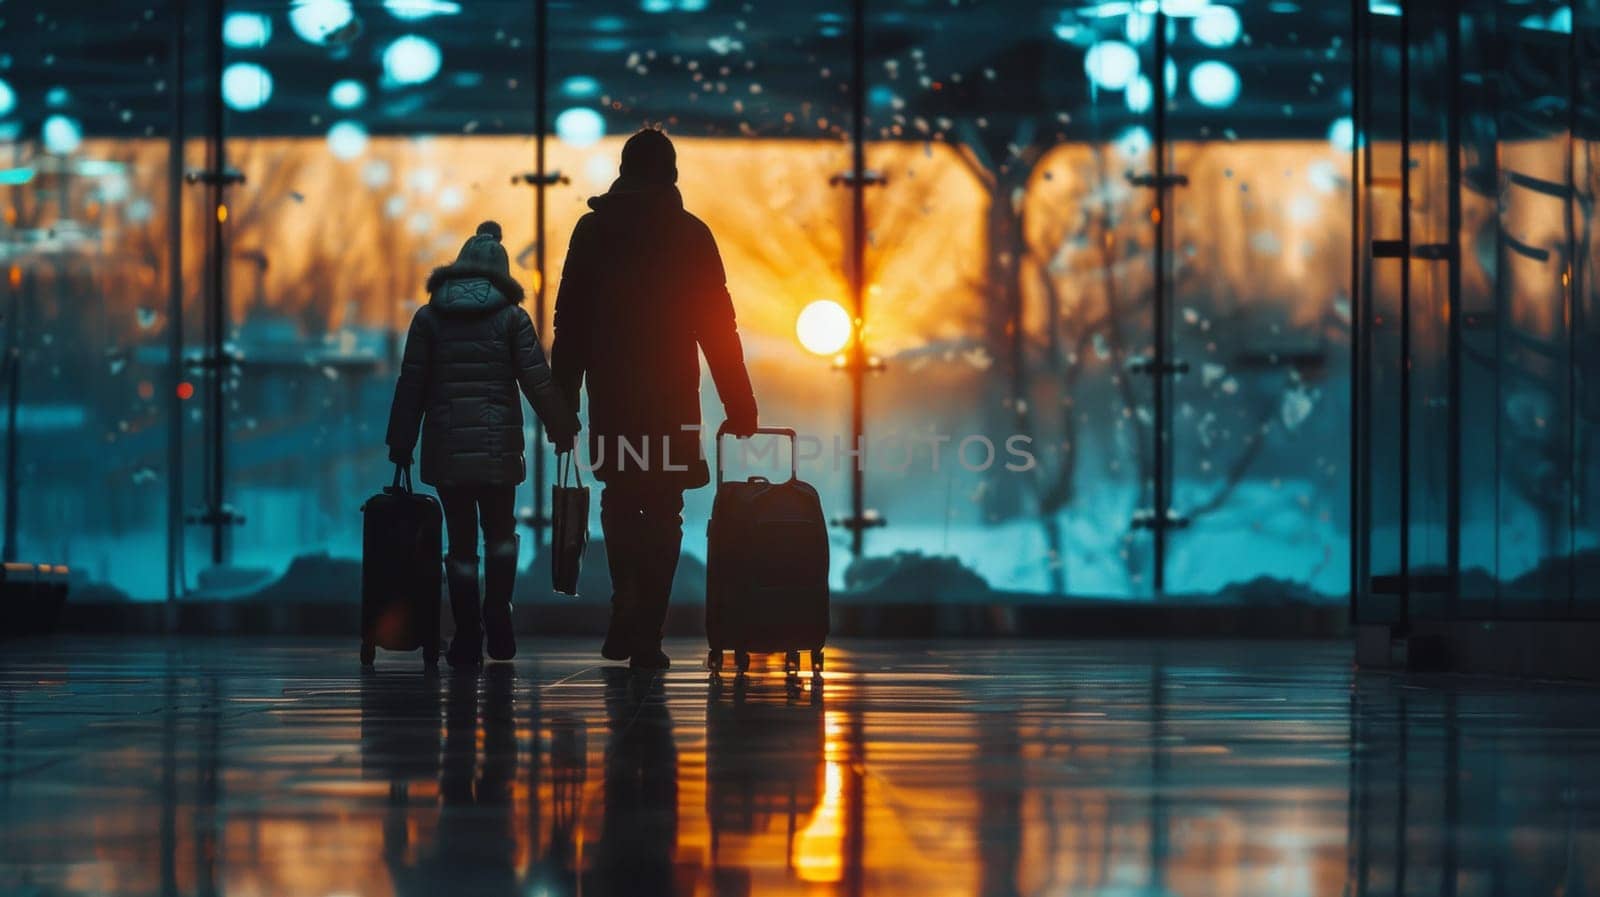 A man and woman walking with luggage through an airport